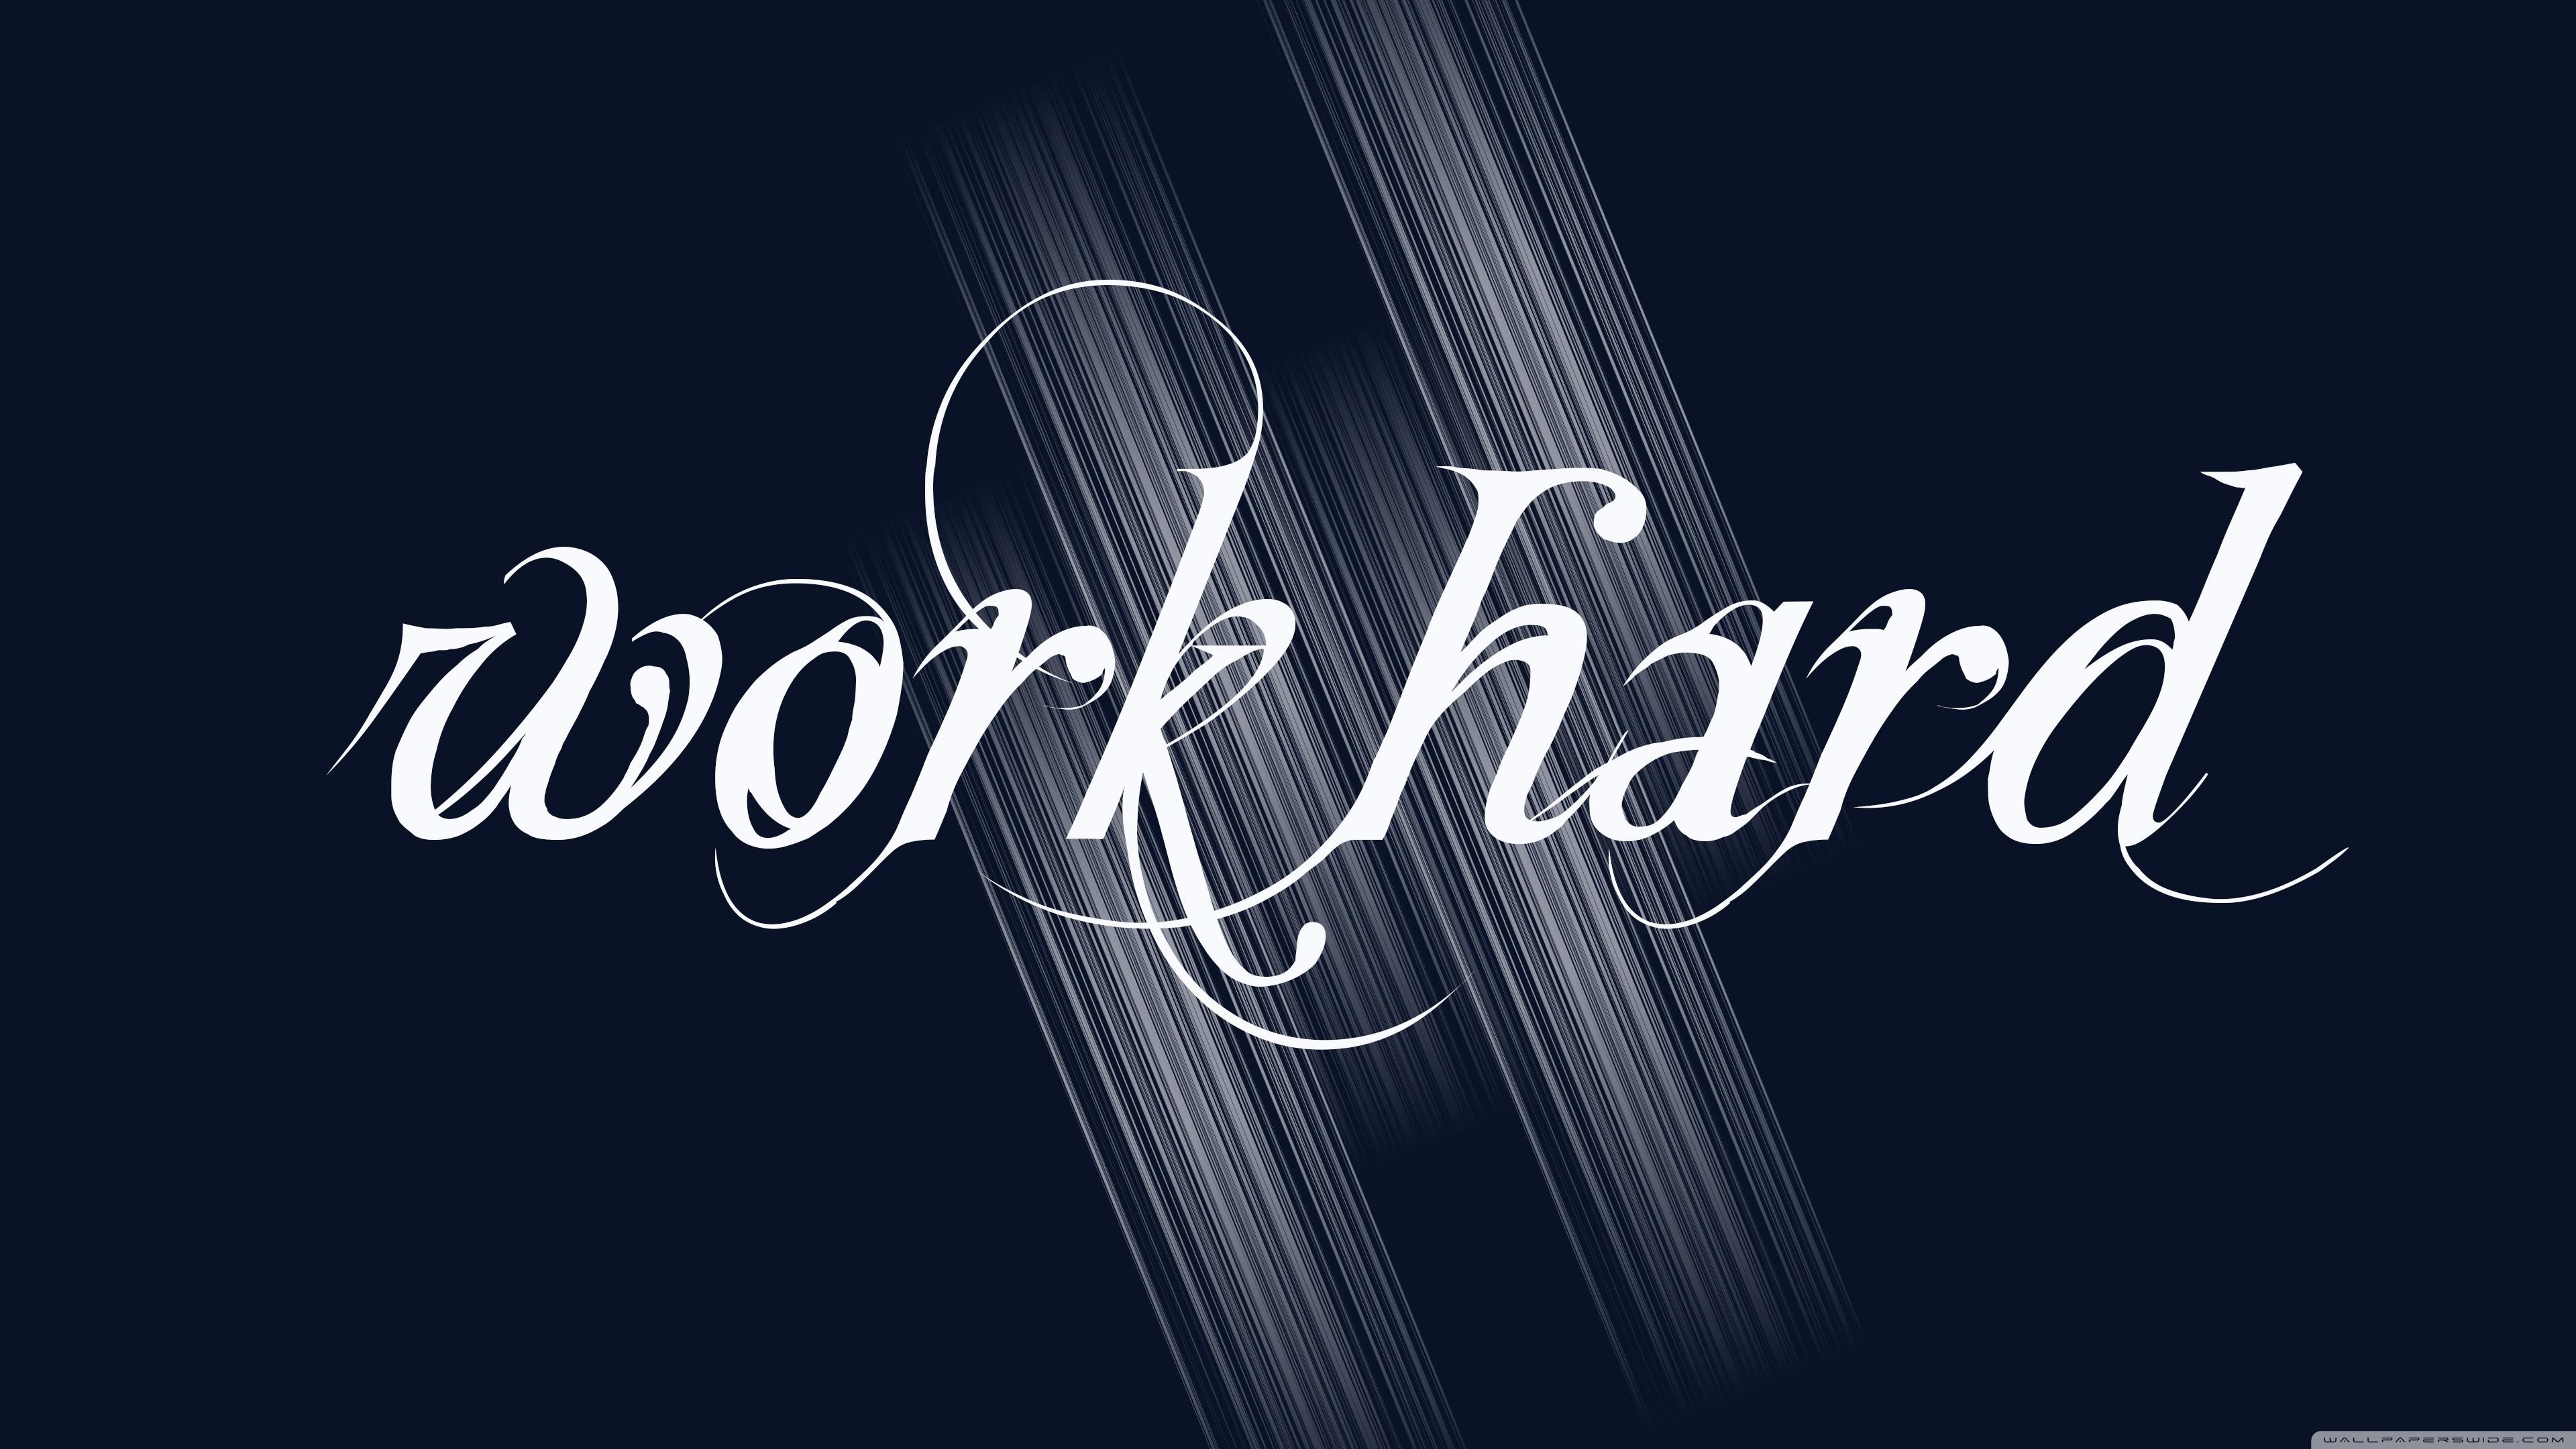 3840x2160 Source Â· Work Hard Wallpaper 42 Find HD Wallpapers For Free